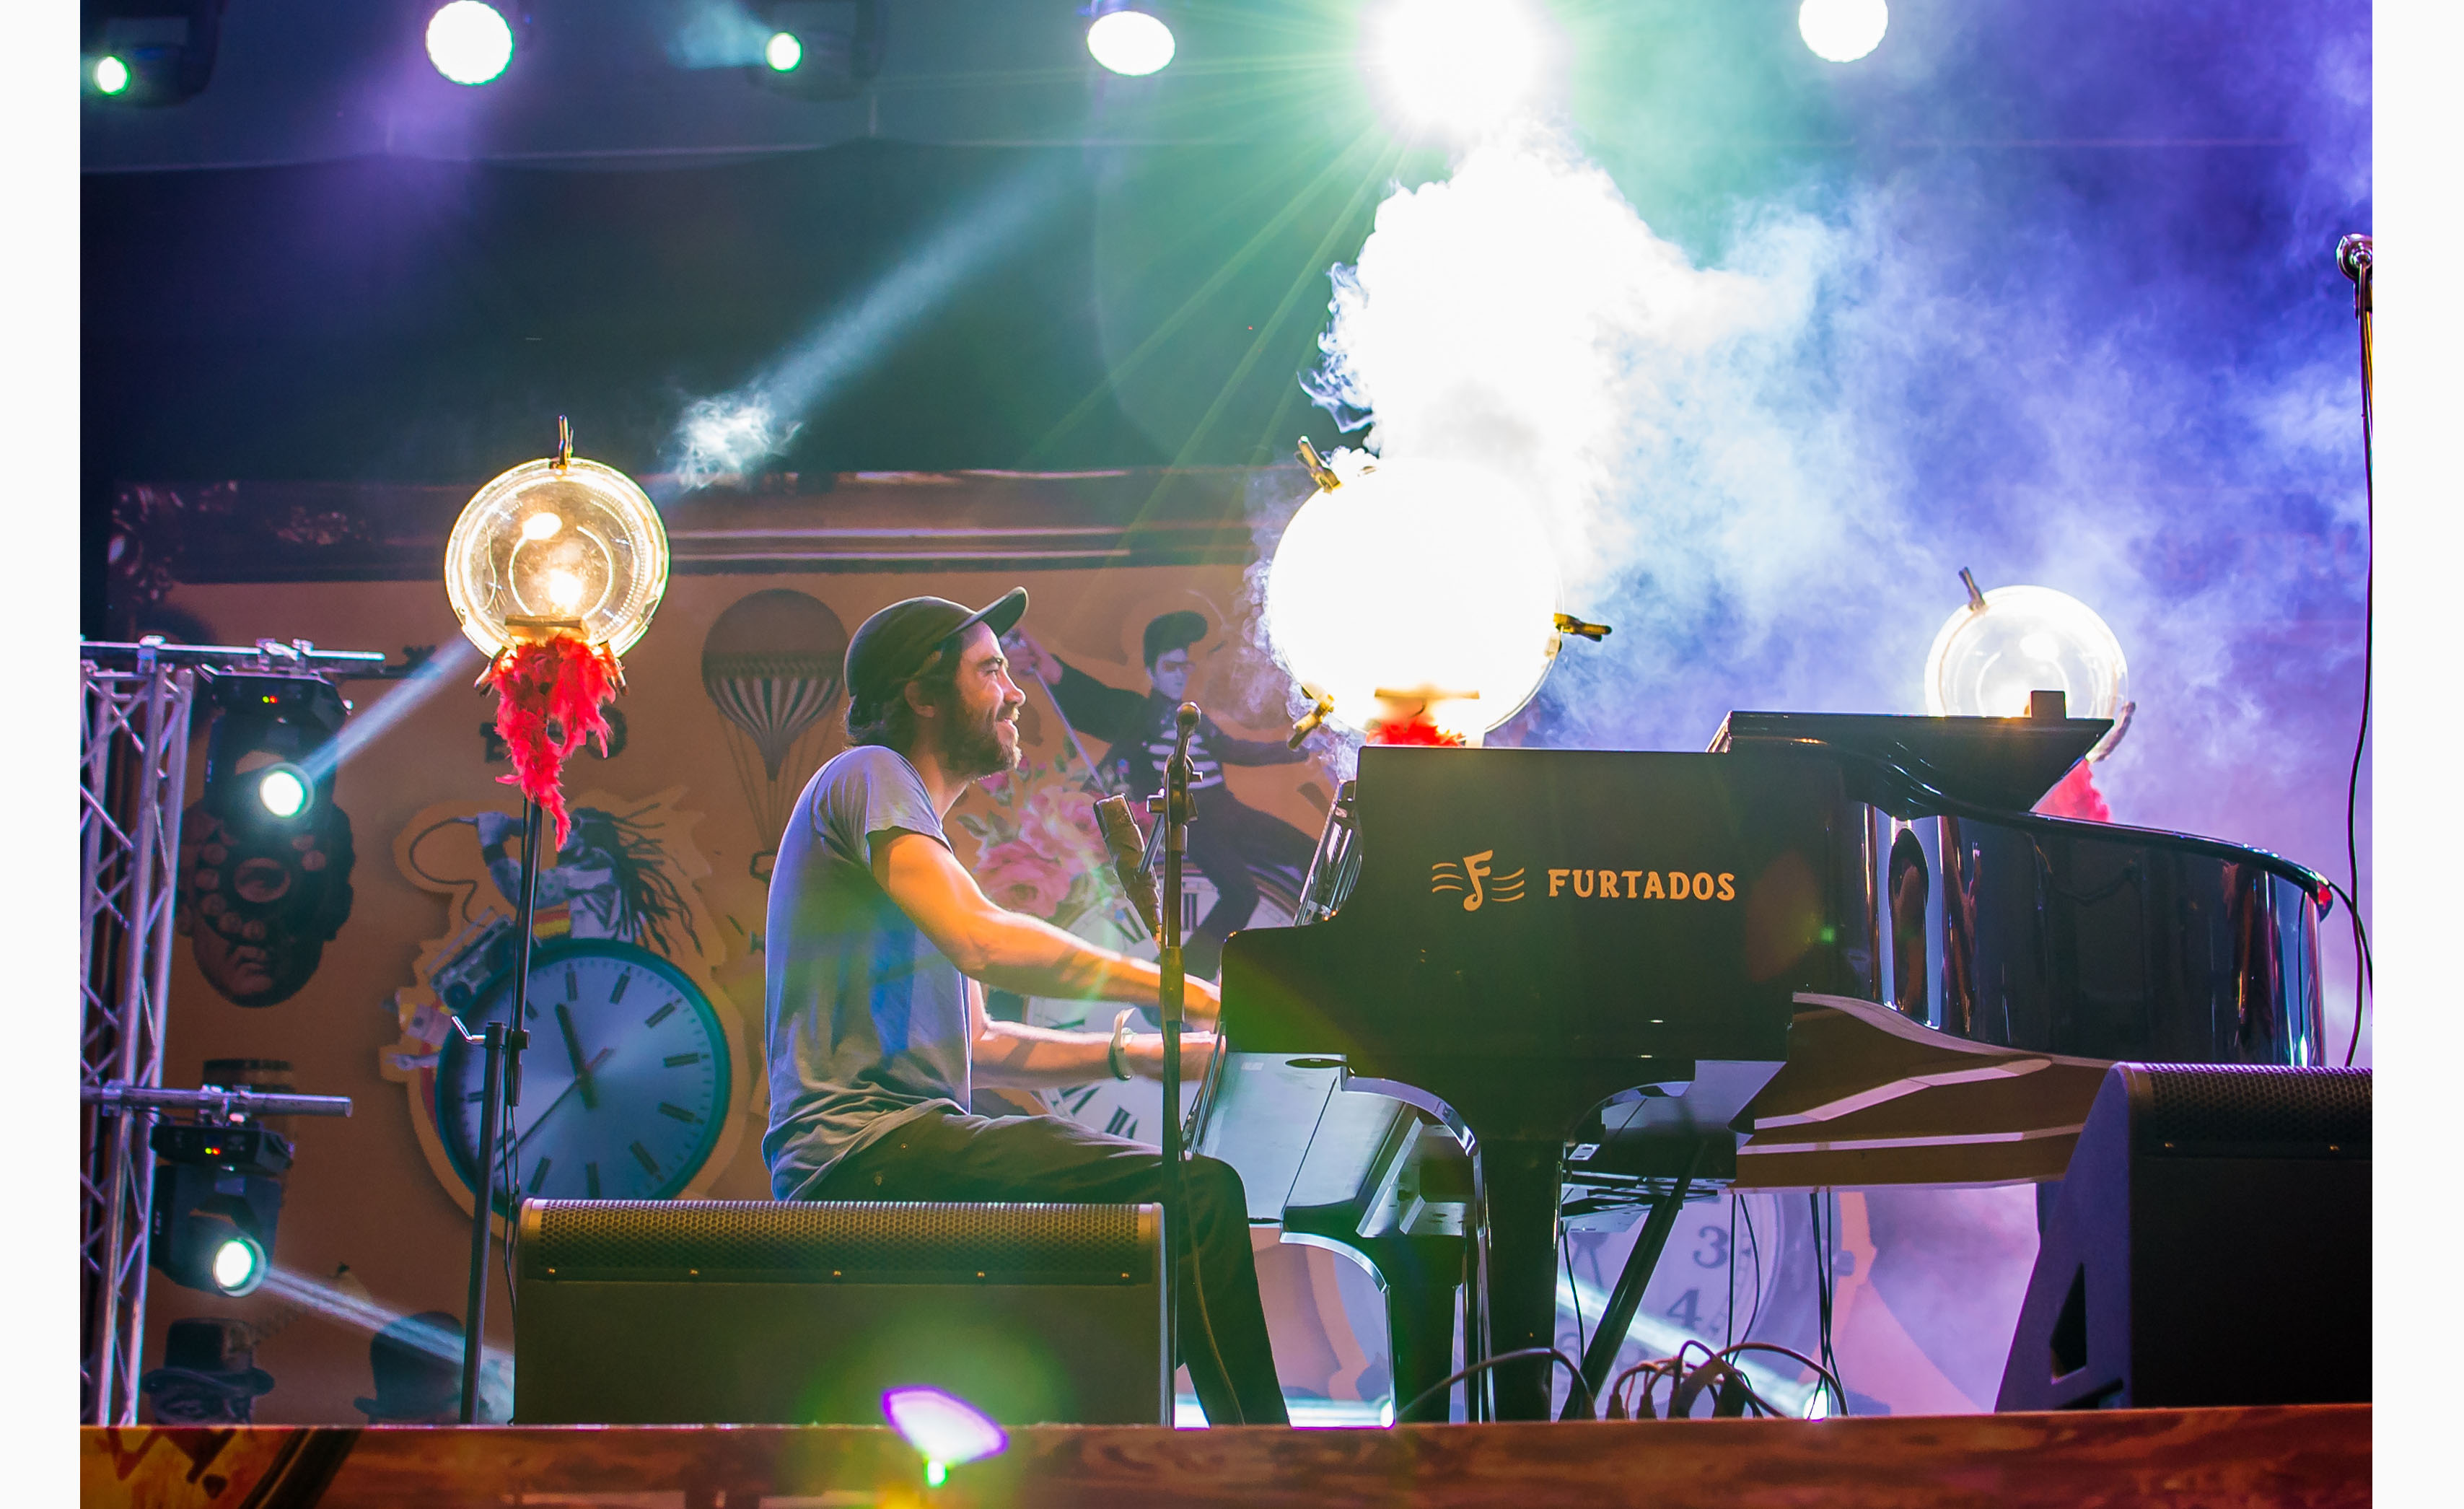  Patrick Watson performance on Day 2 of Bacardi NH7 Weekender Pune. Photo Credit - Clique Photography